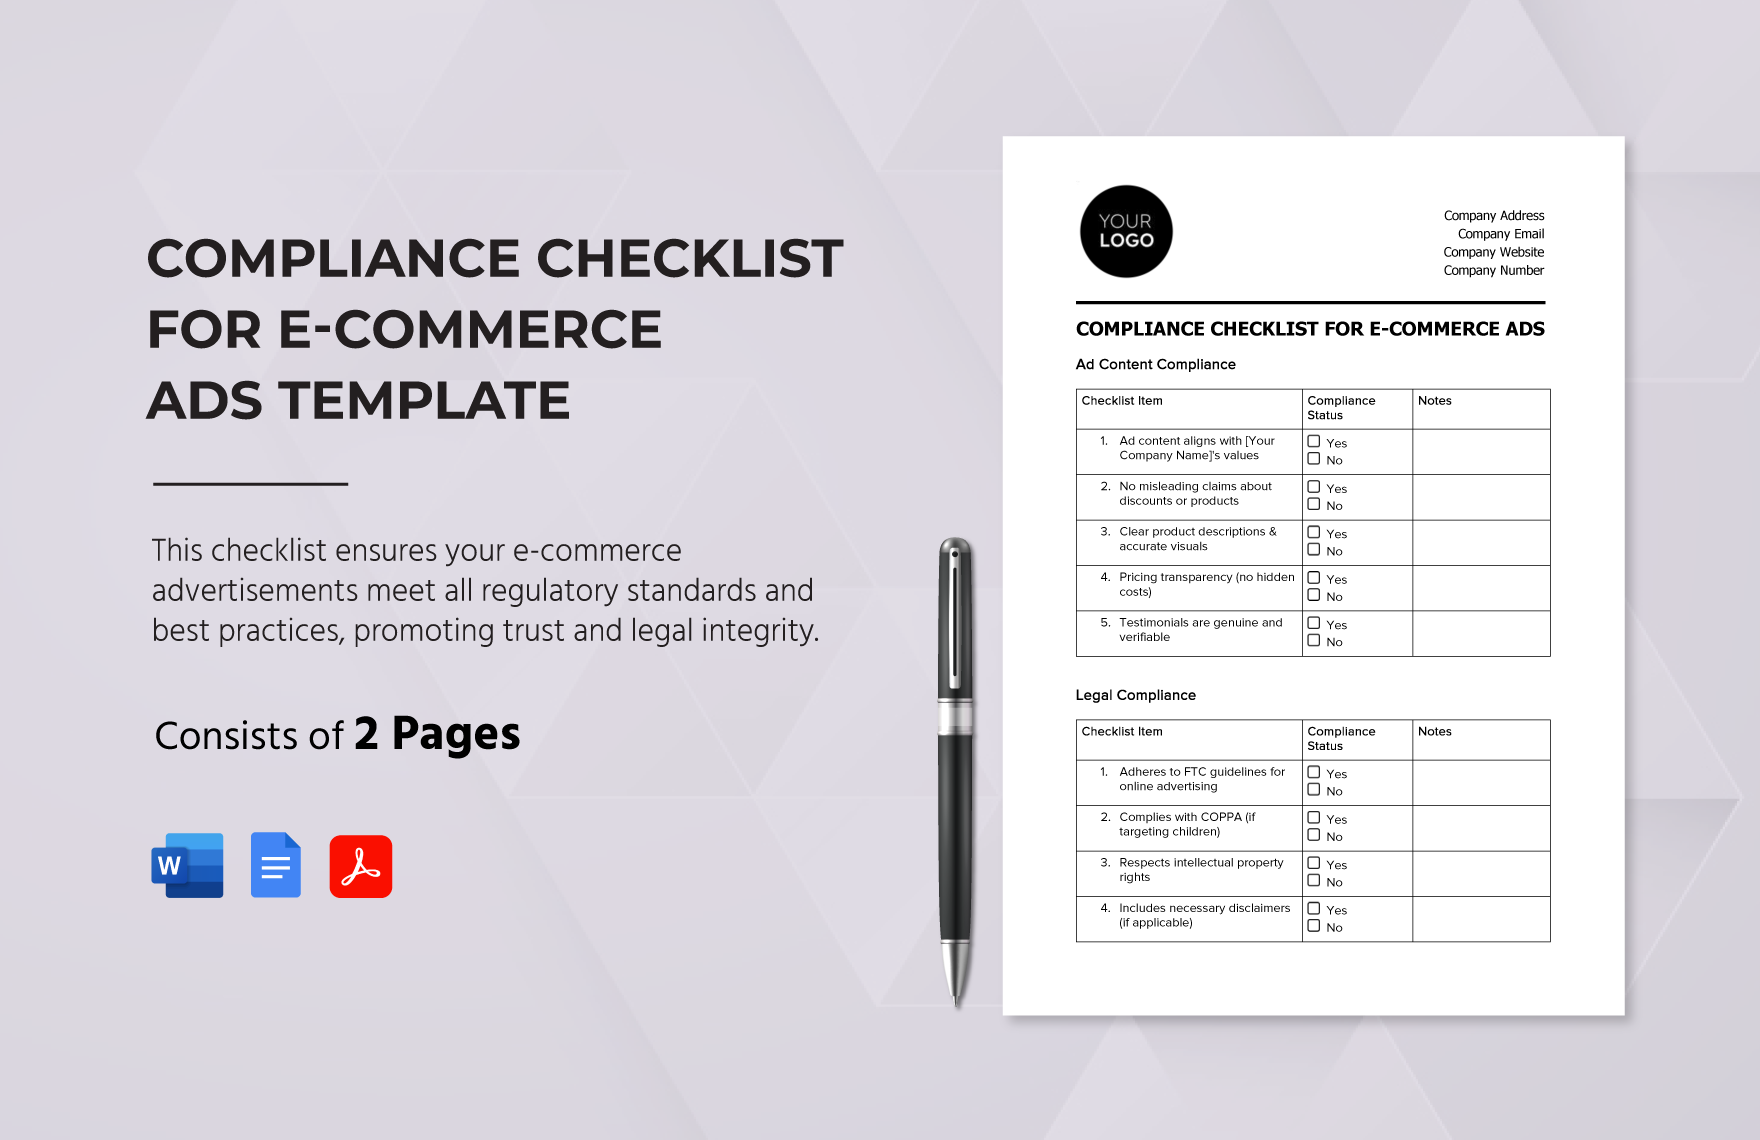 Compliance Checklist for E-commerce Ads Template in Word, Google Docs, PDF